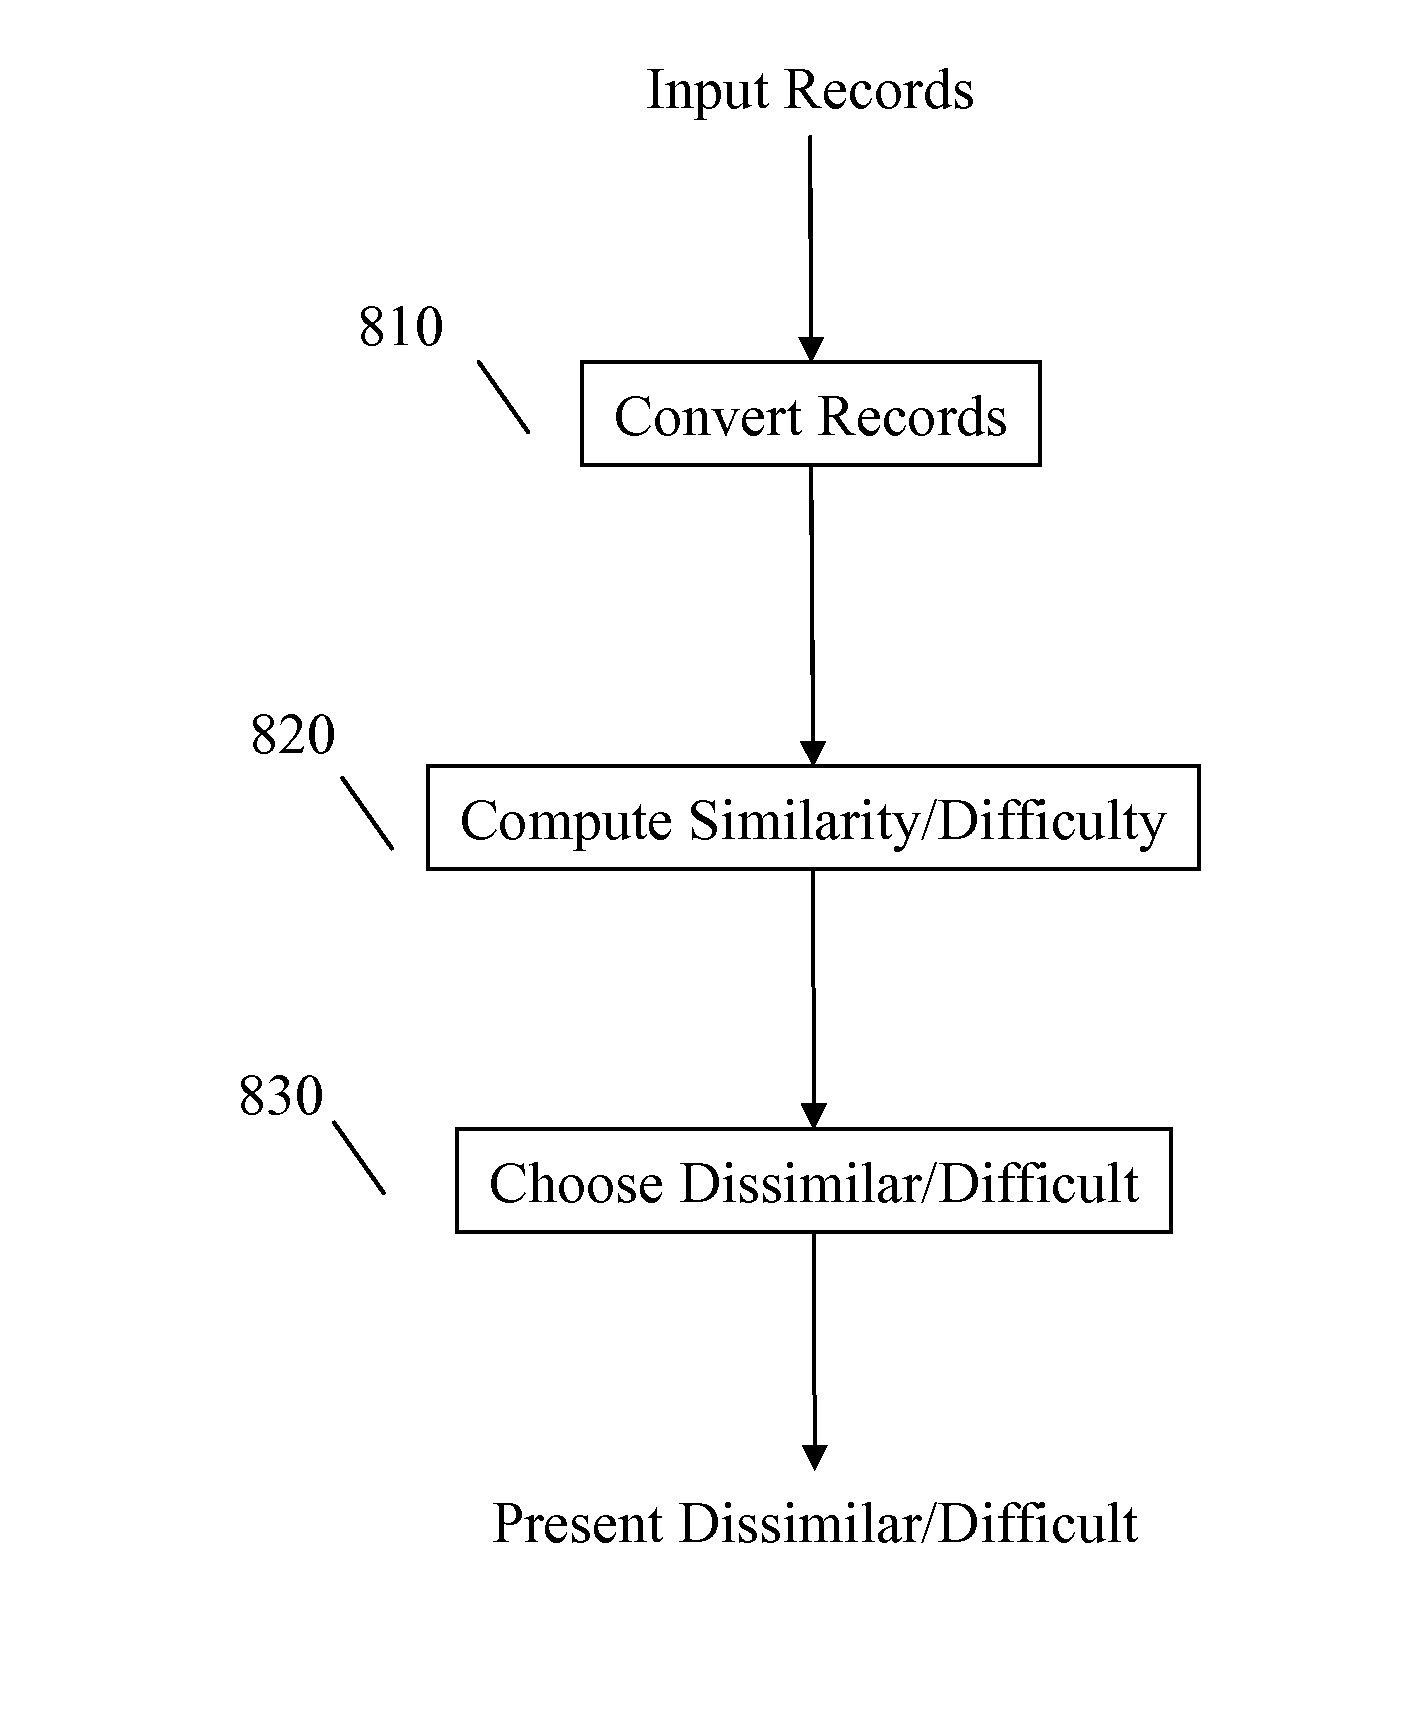 Systems and methods for efficient development of a rule-based system using crowd-sourcing